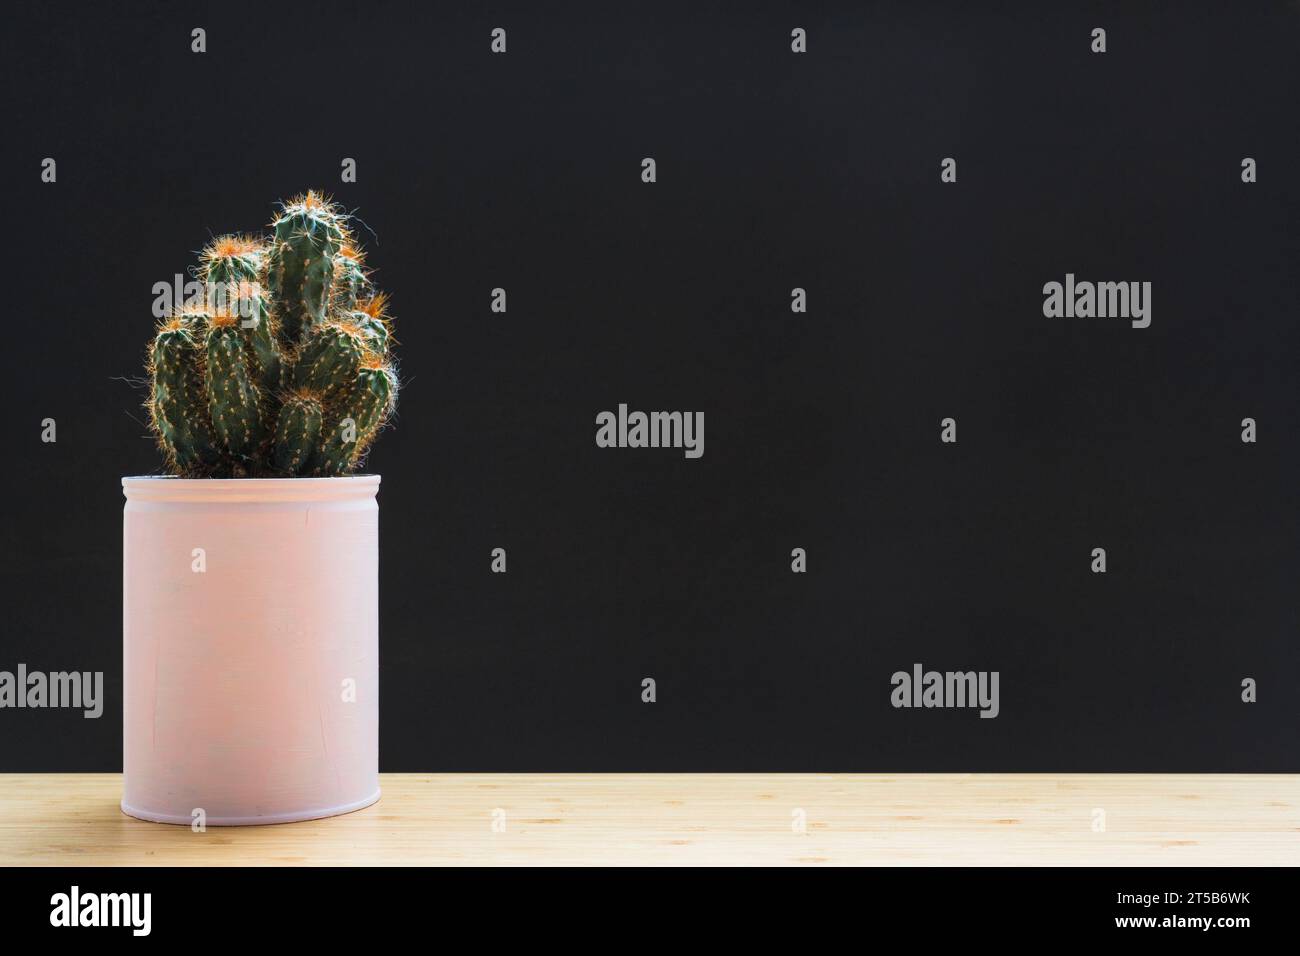 Cactus plant white container table against black backdrop Stock Photo